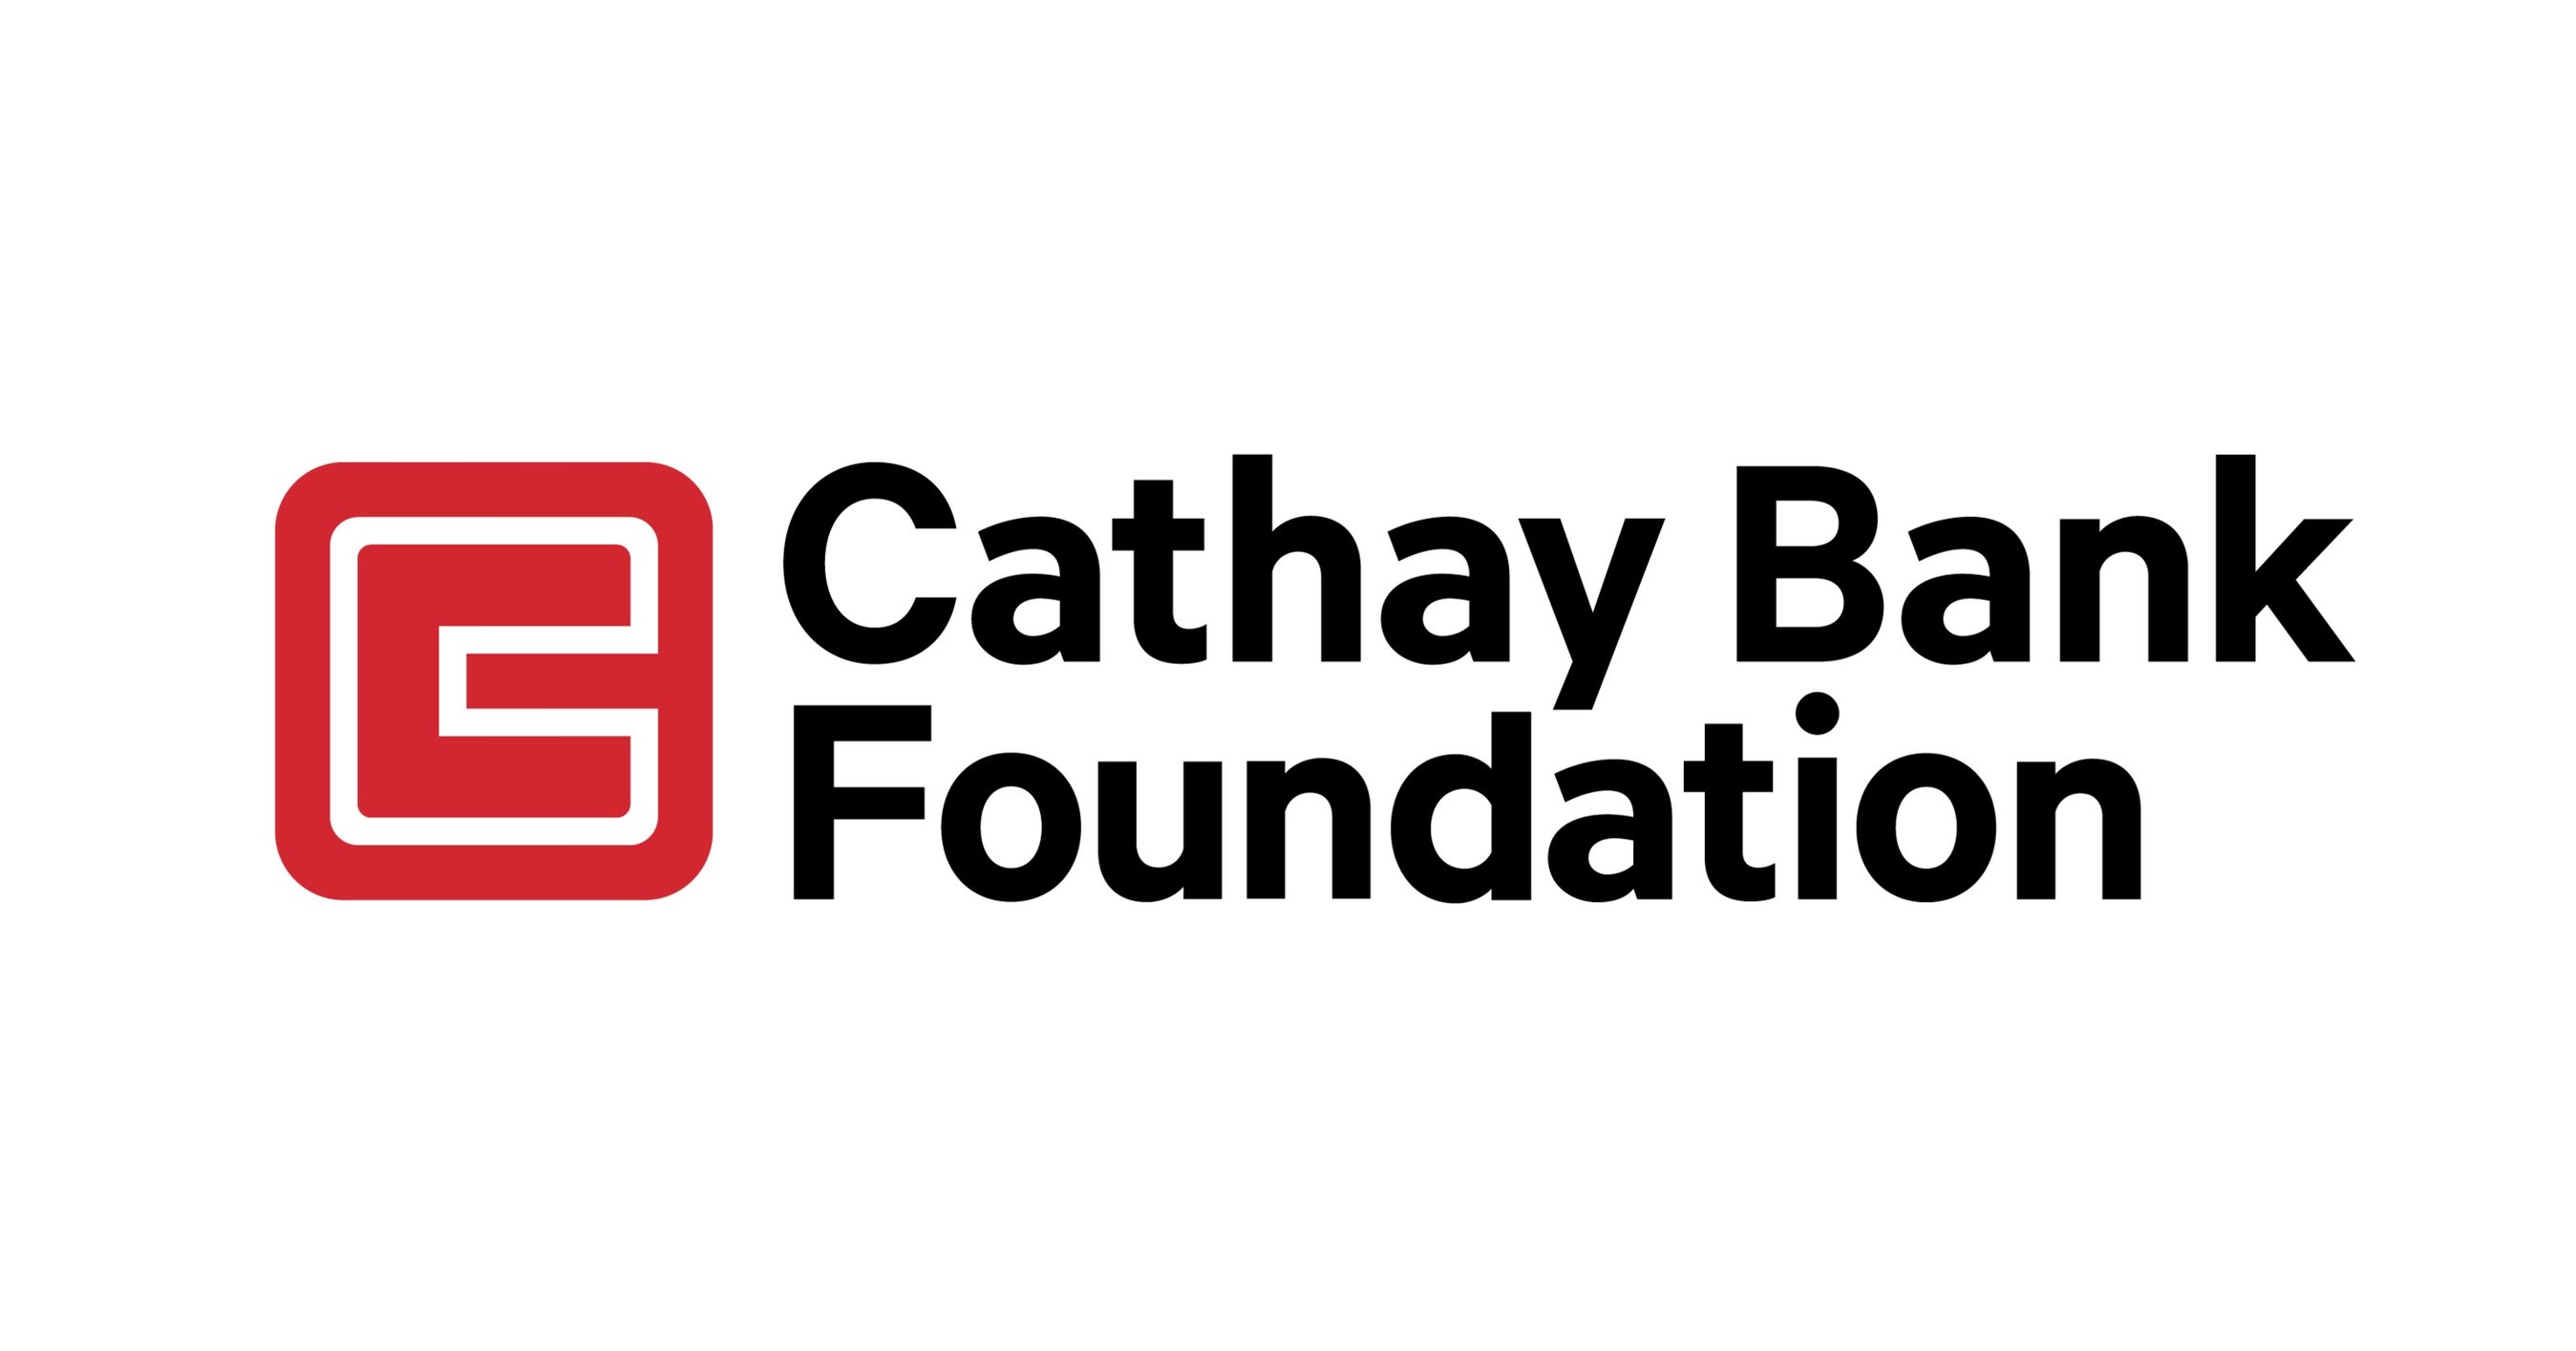 Cathay Bank Foundation Announces Donation To Support Our Community